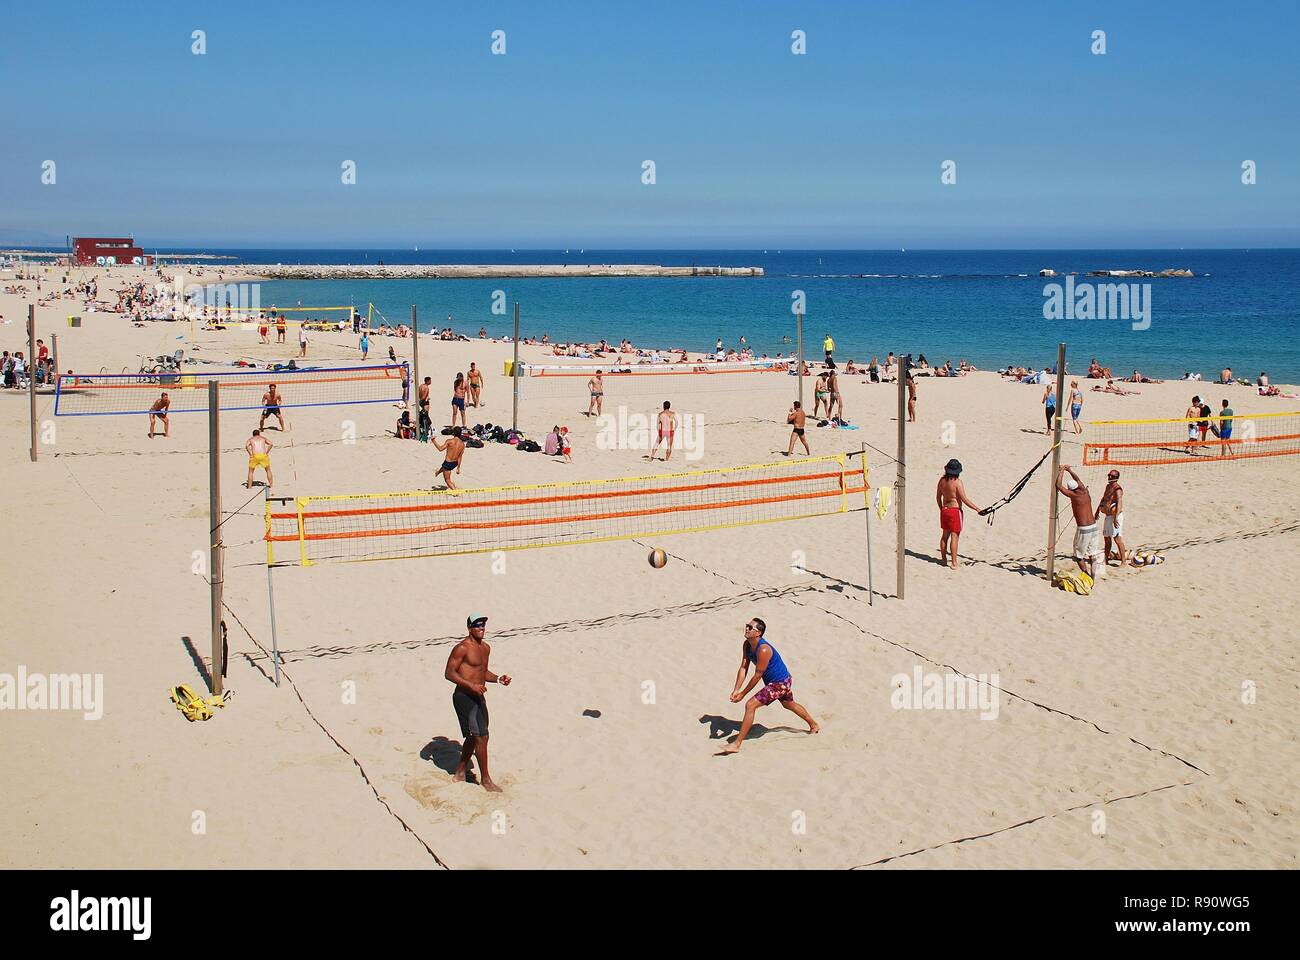 People play volley ball on the beach at Barcelona in Catalonia, Spain on April 17, 2018. Stock Photo